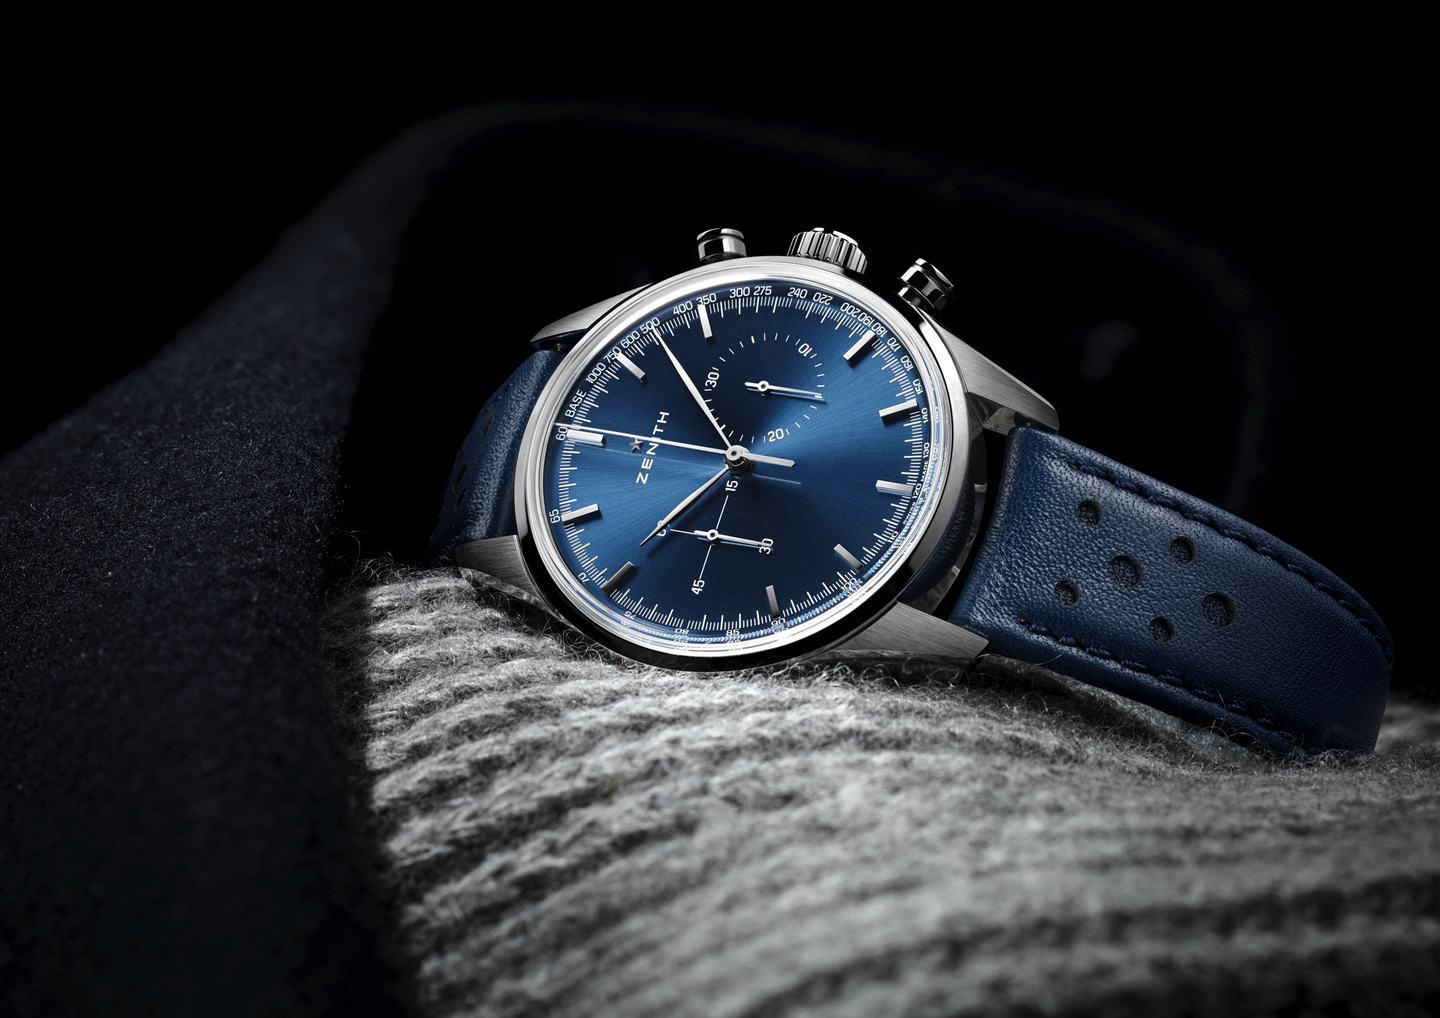 Introducing the Zenith Heritage 146